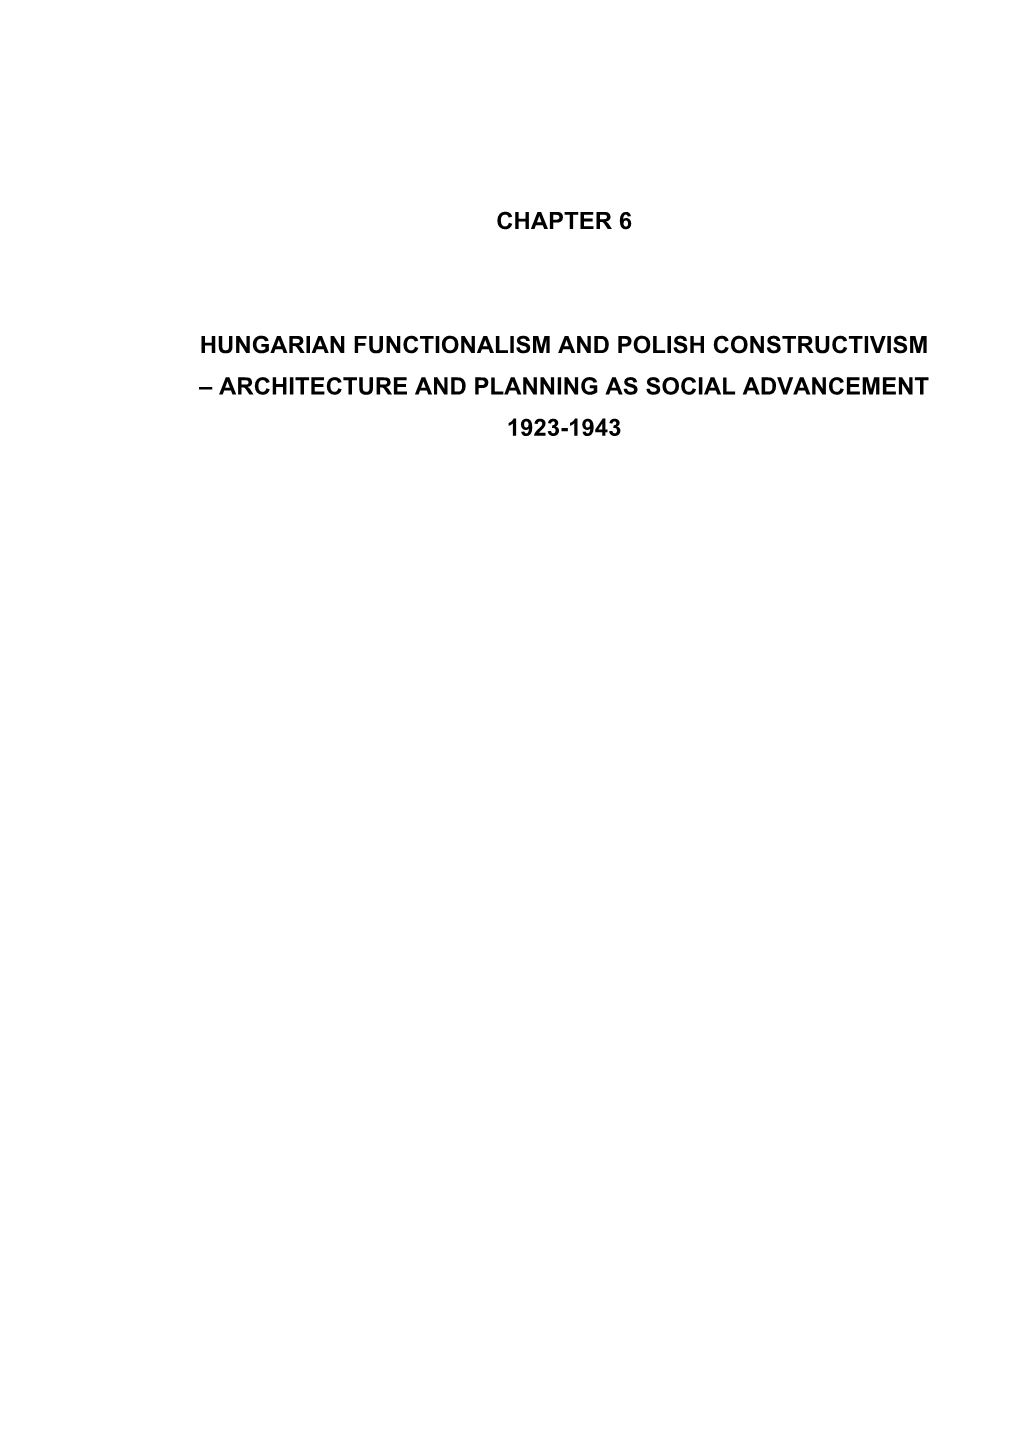 Chapter 6 Hungarian Functionalism and Polish Constructivism